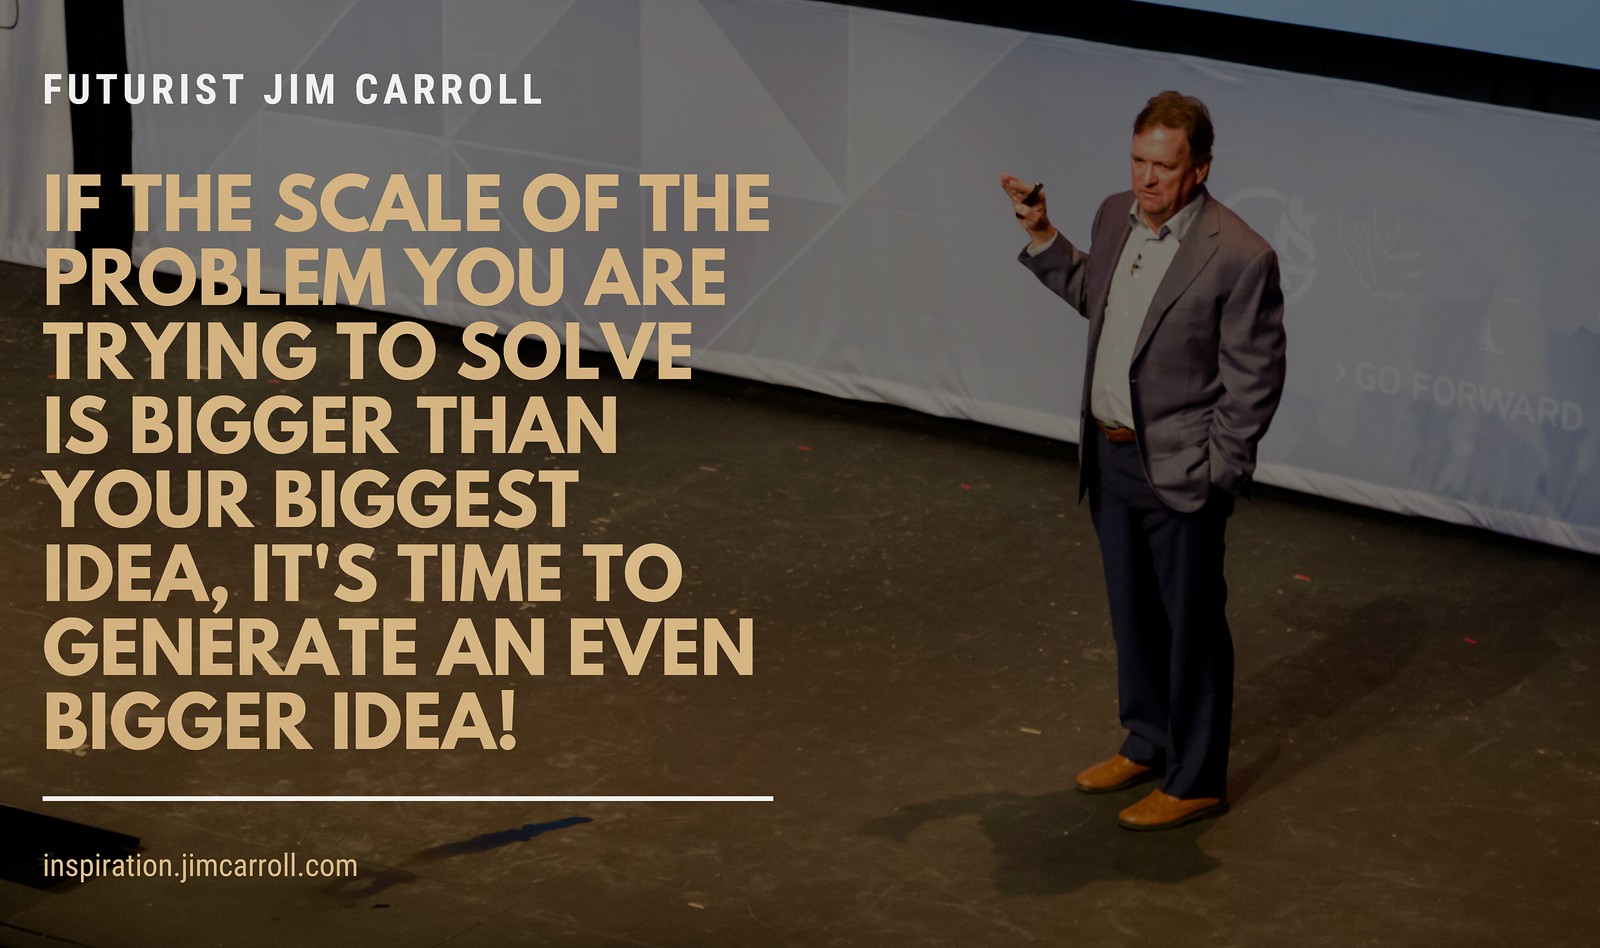 "If the scale of the problem you are trying to solve is bigger than your biggest idea, it's time to generate an even bigger idea!" - Futurist Jim Carroll